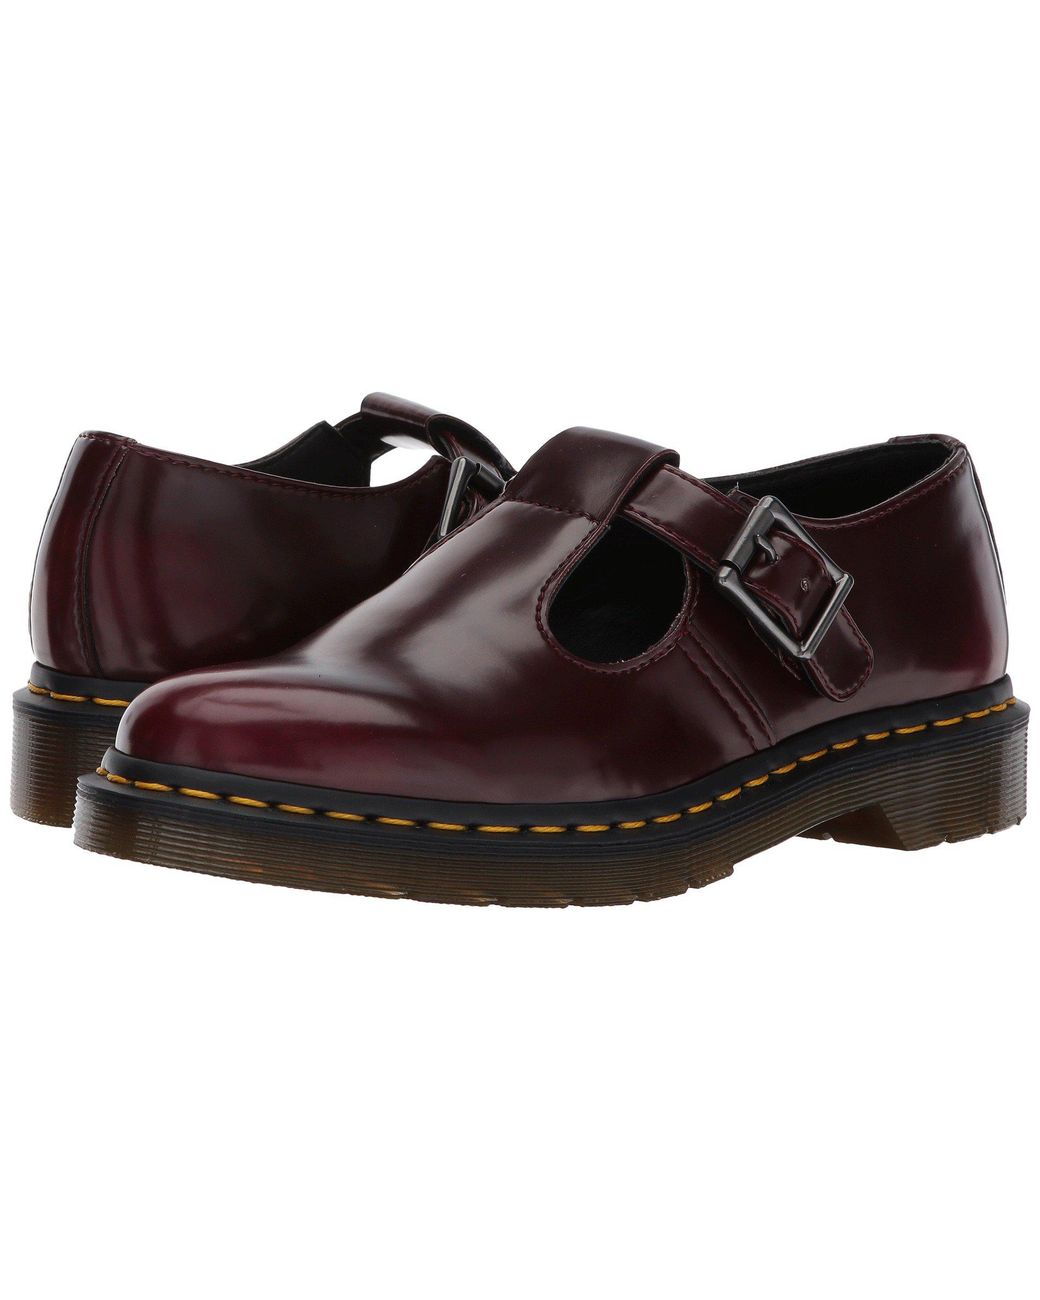 Dr. Martens Leather Vegan Polley T-bar Mary Jane | Lyst